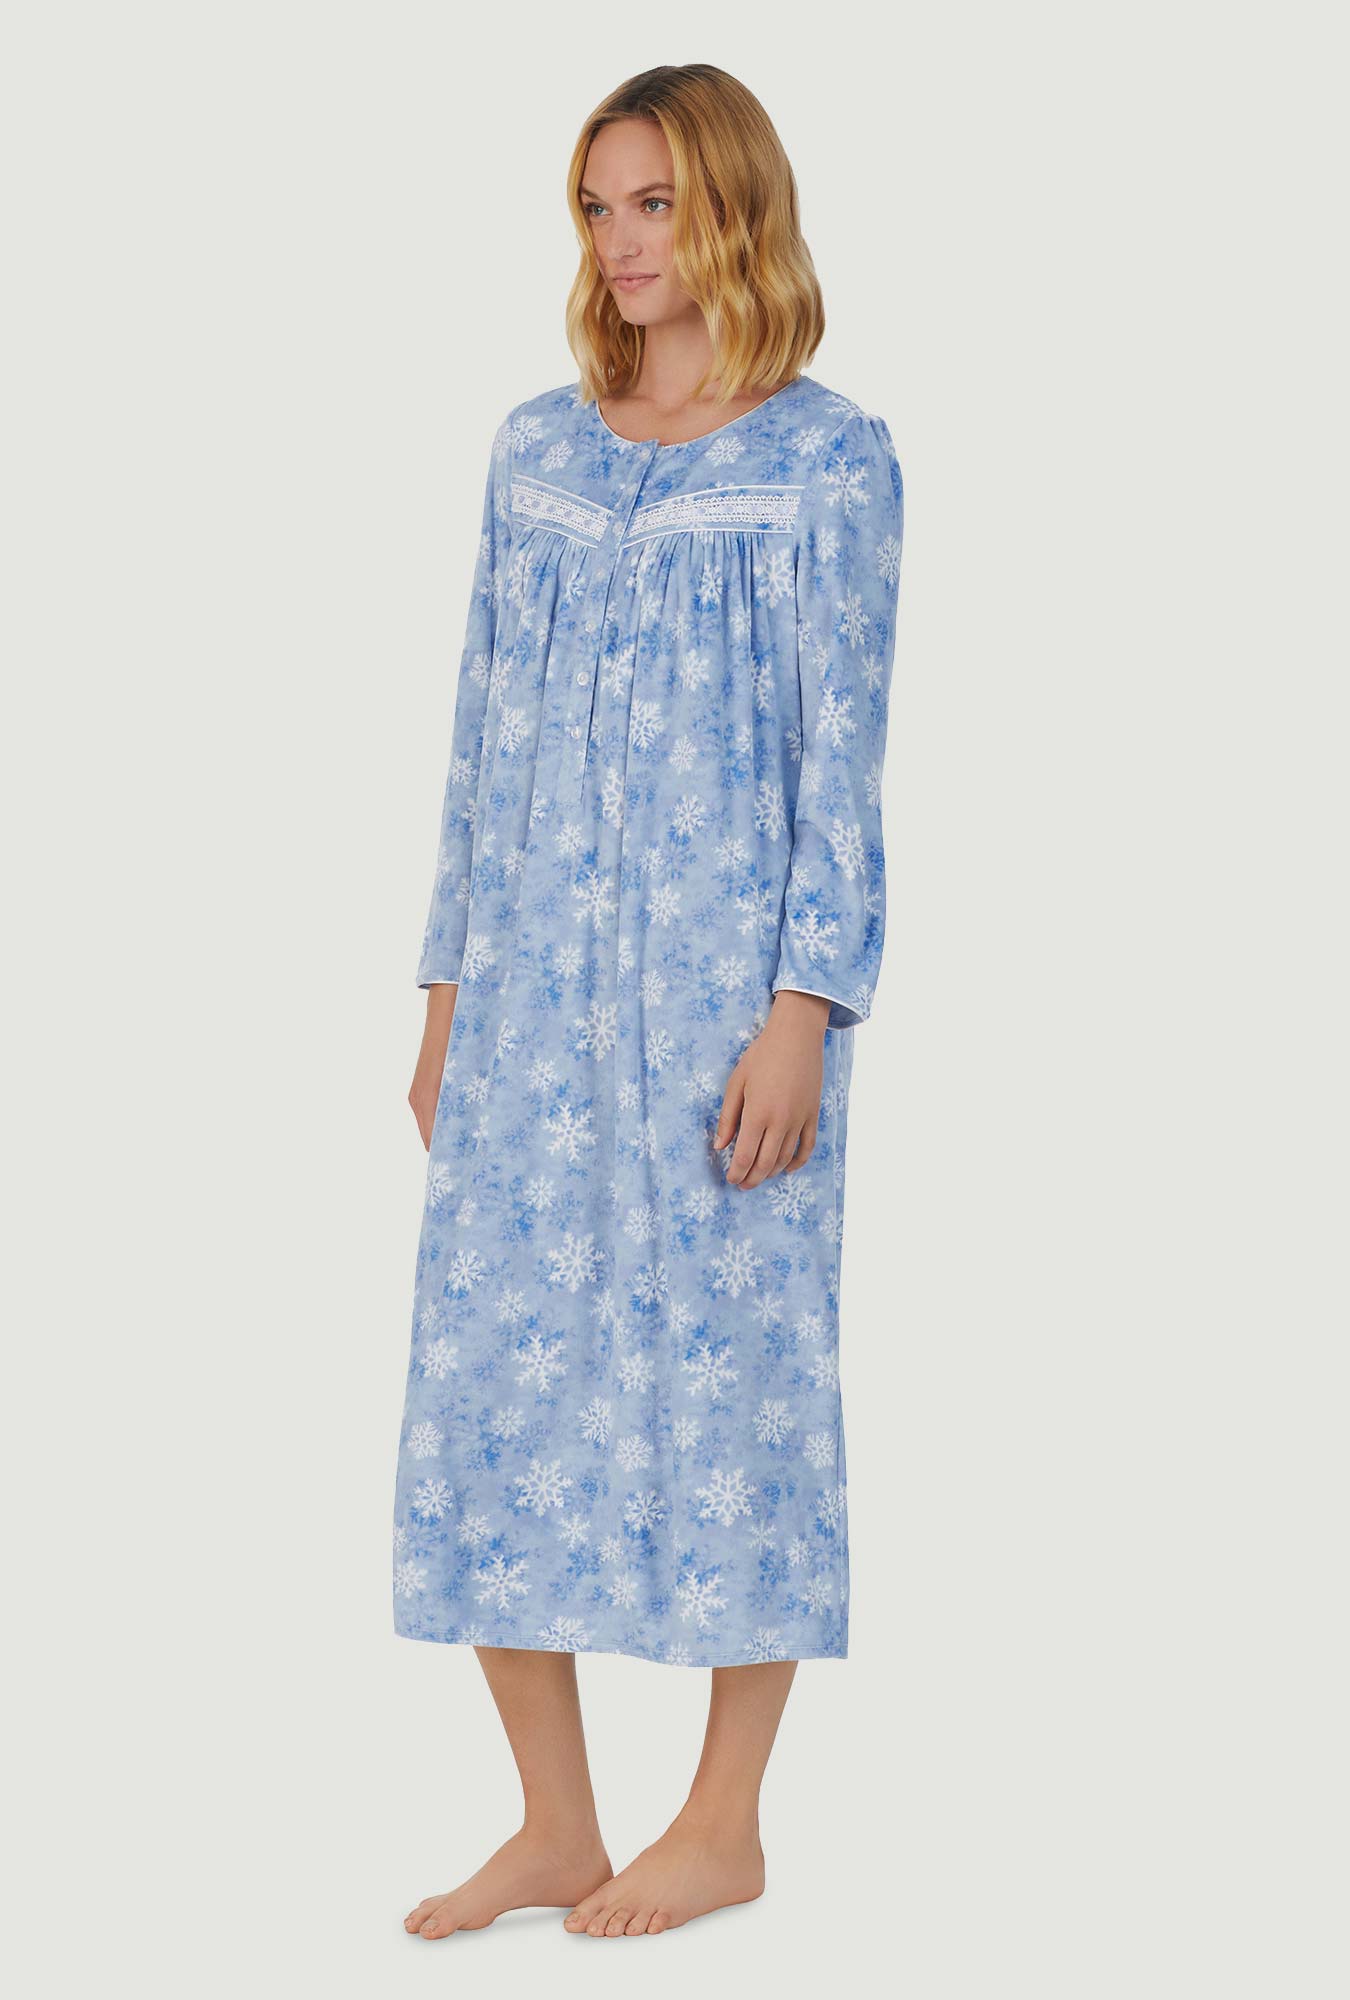 A lady wearing blue long sleeve cozy  fleece gown with snowflake wonderland print.